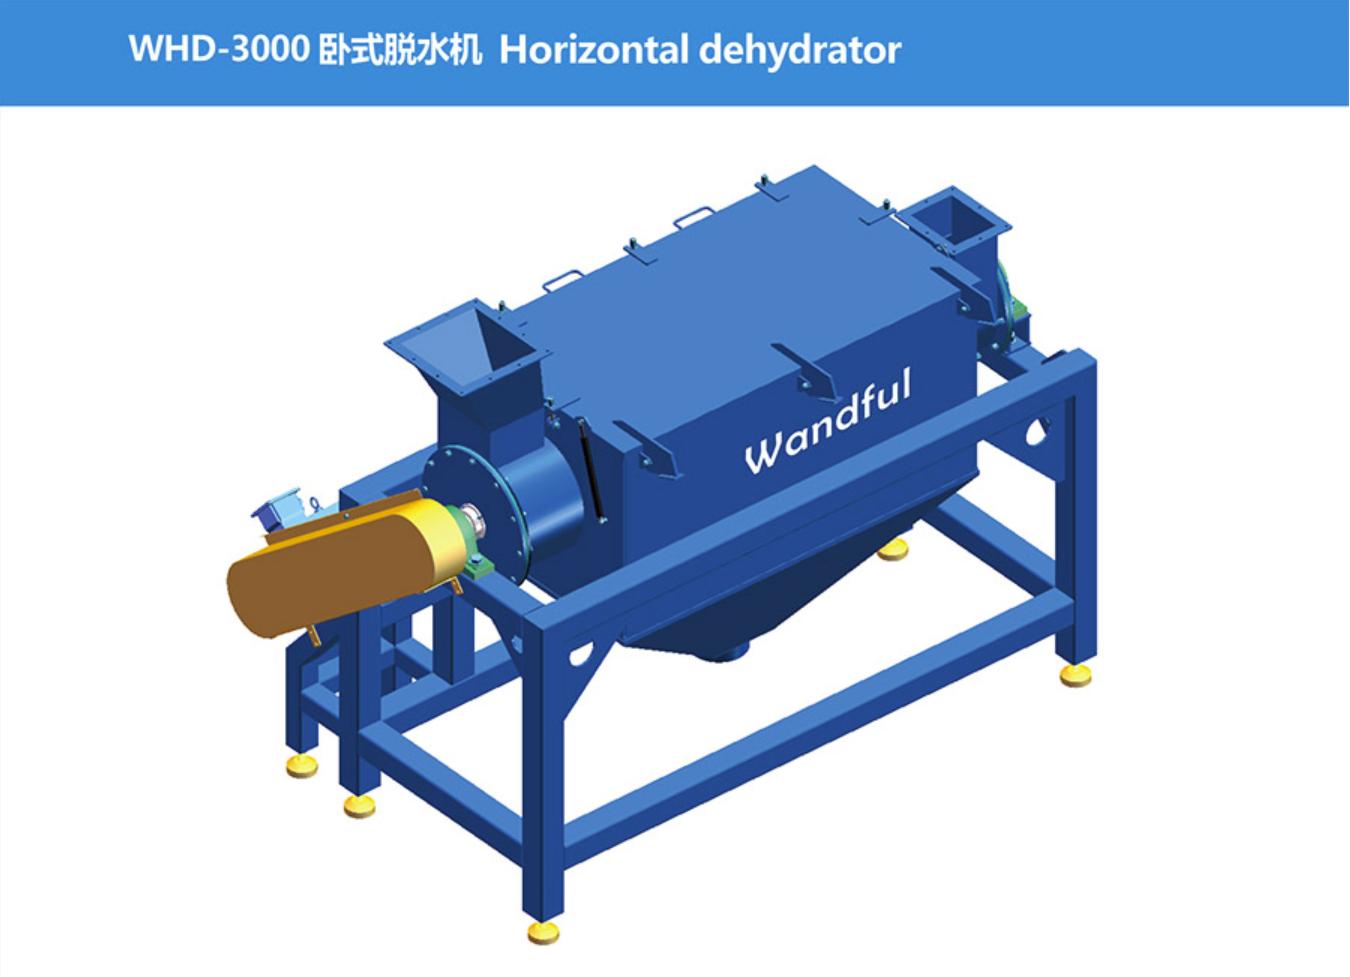 Wandful Stainless Steel Recycled Plastic Dewatering Machine PE Sheet Spin Dryer Water-washing Plastic Dehydrator PP Polypropylene Spin Dryer Slicing Material Dehydrator Spot PE Dehydrator Plastic Sheet Cleaning Spin Dryer Plastic PE Pellet Horizontal Dewatering Machine